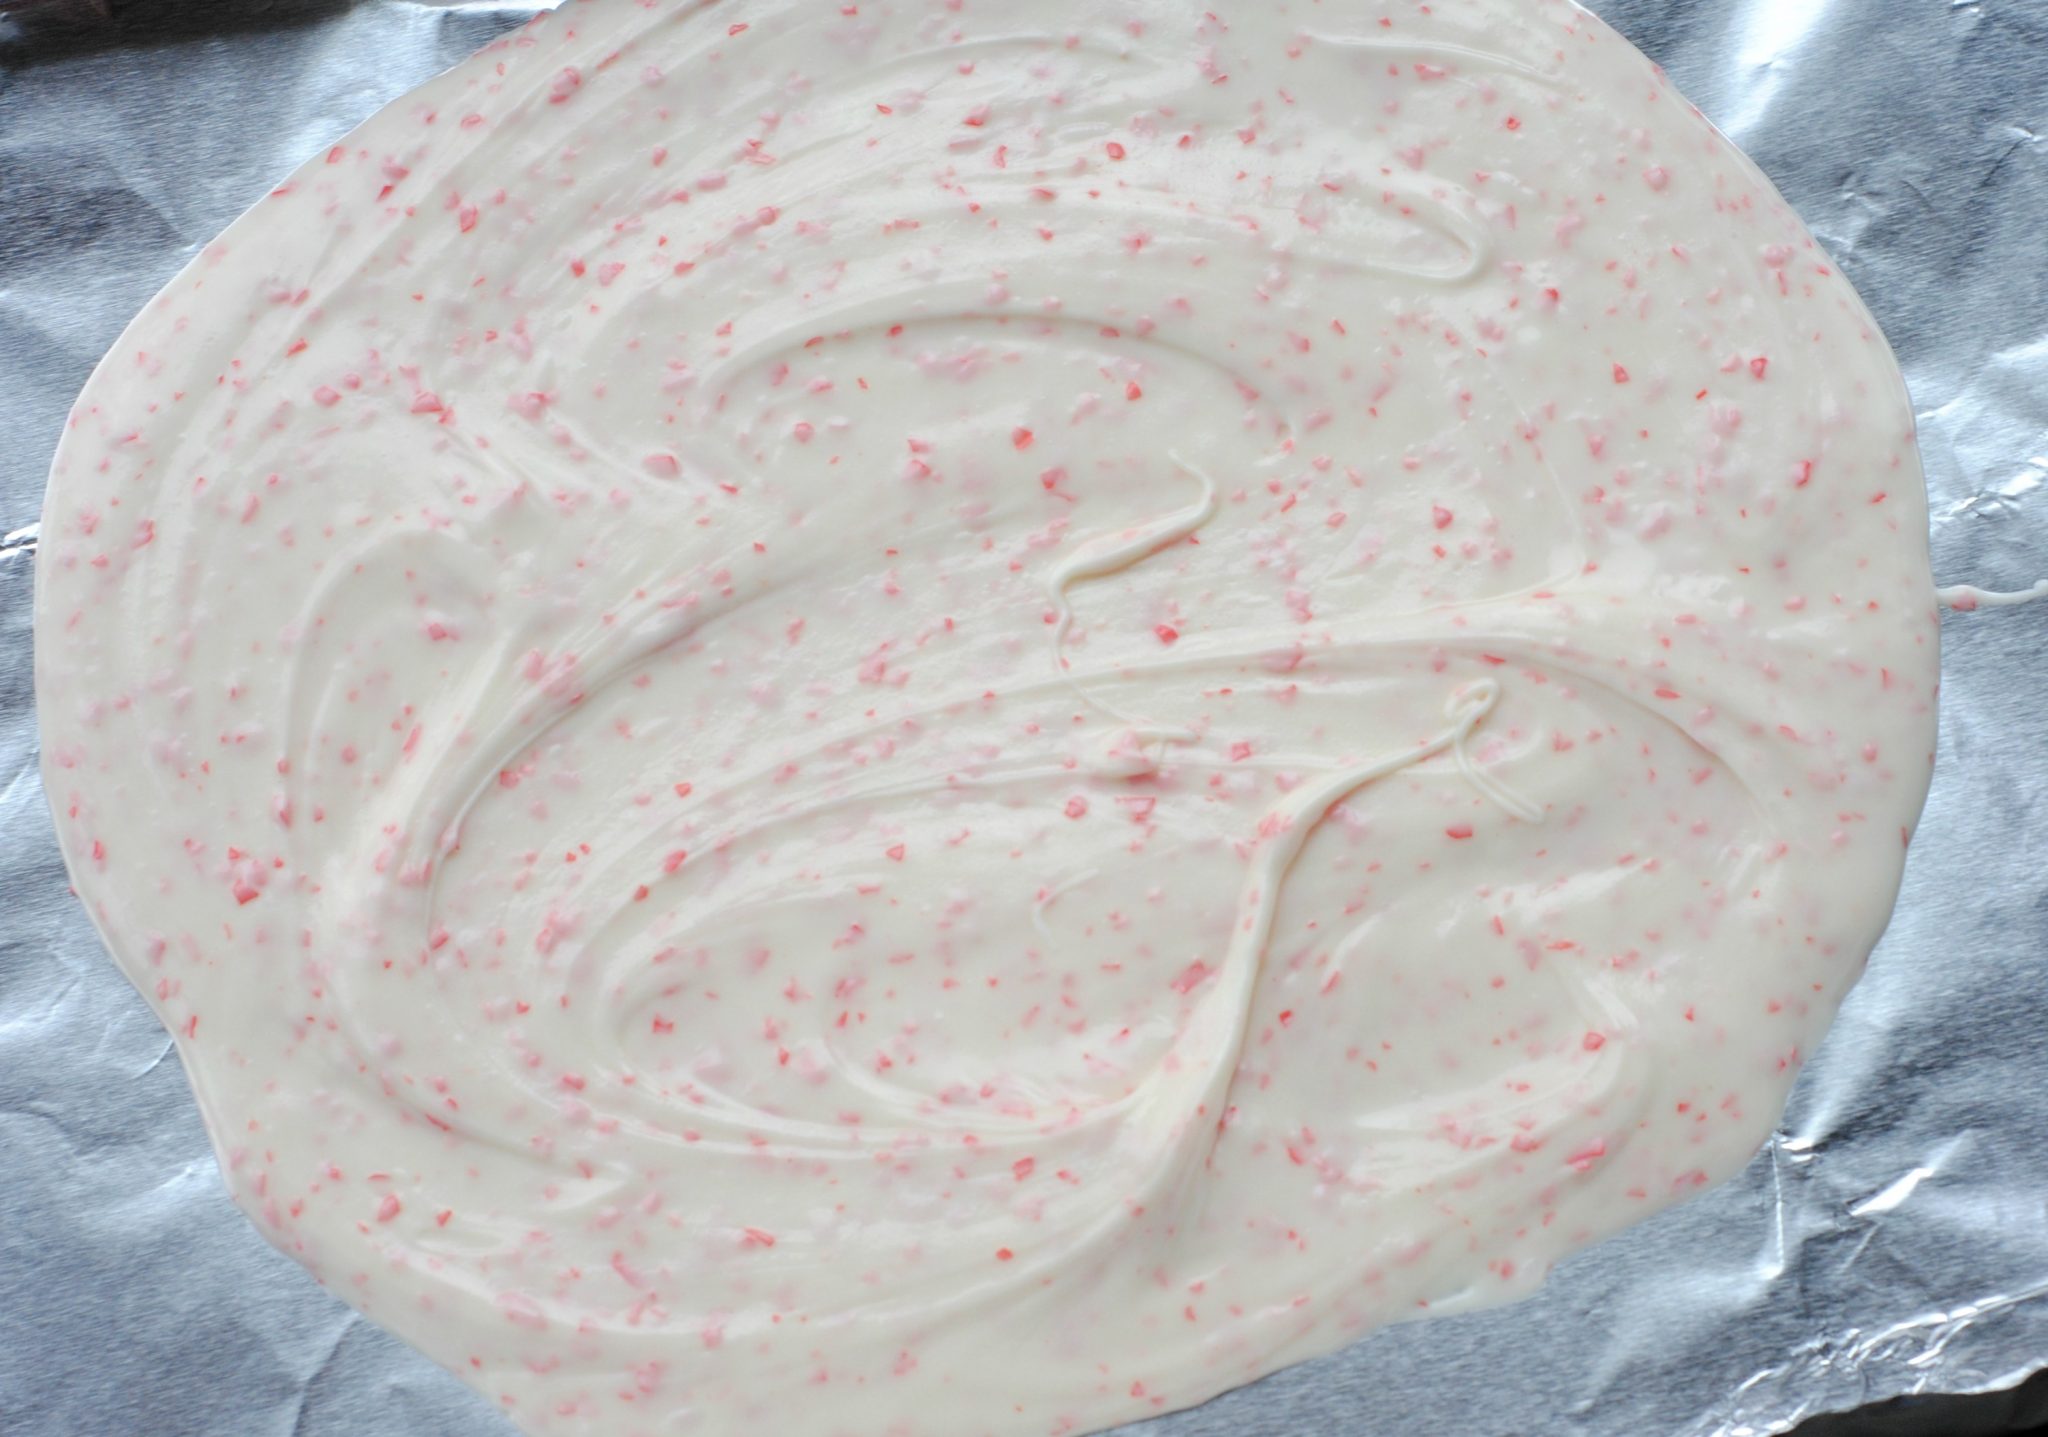 white chocolate and peppermint candies melted on tin foil